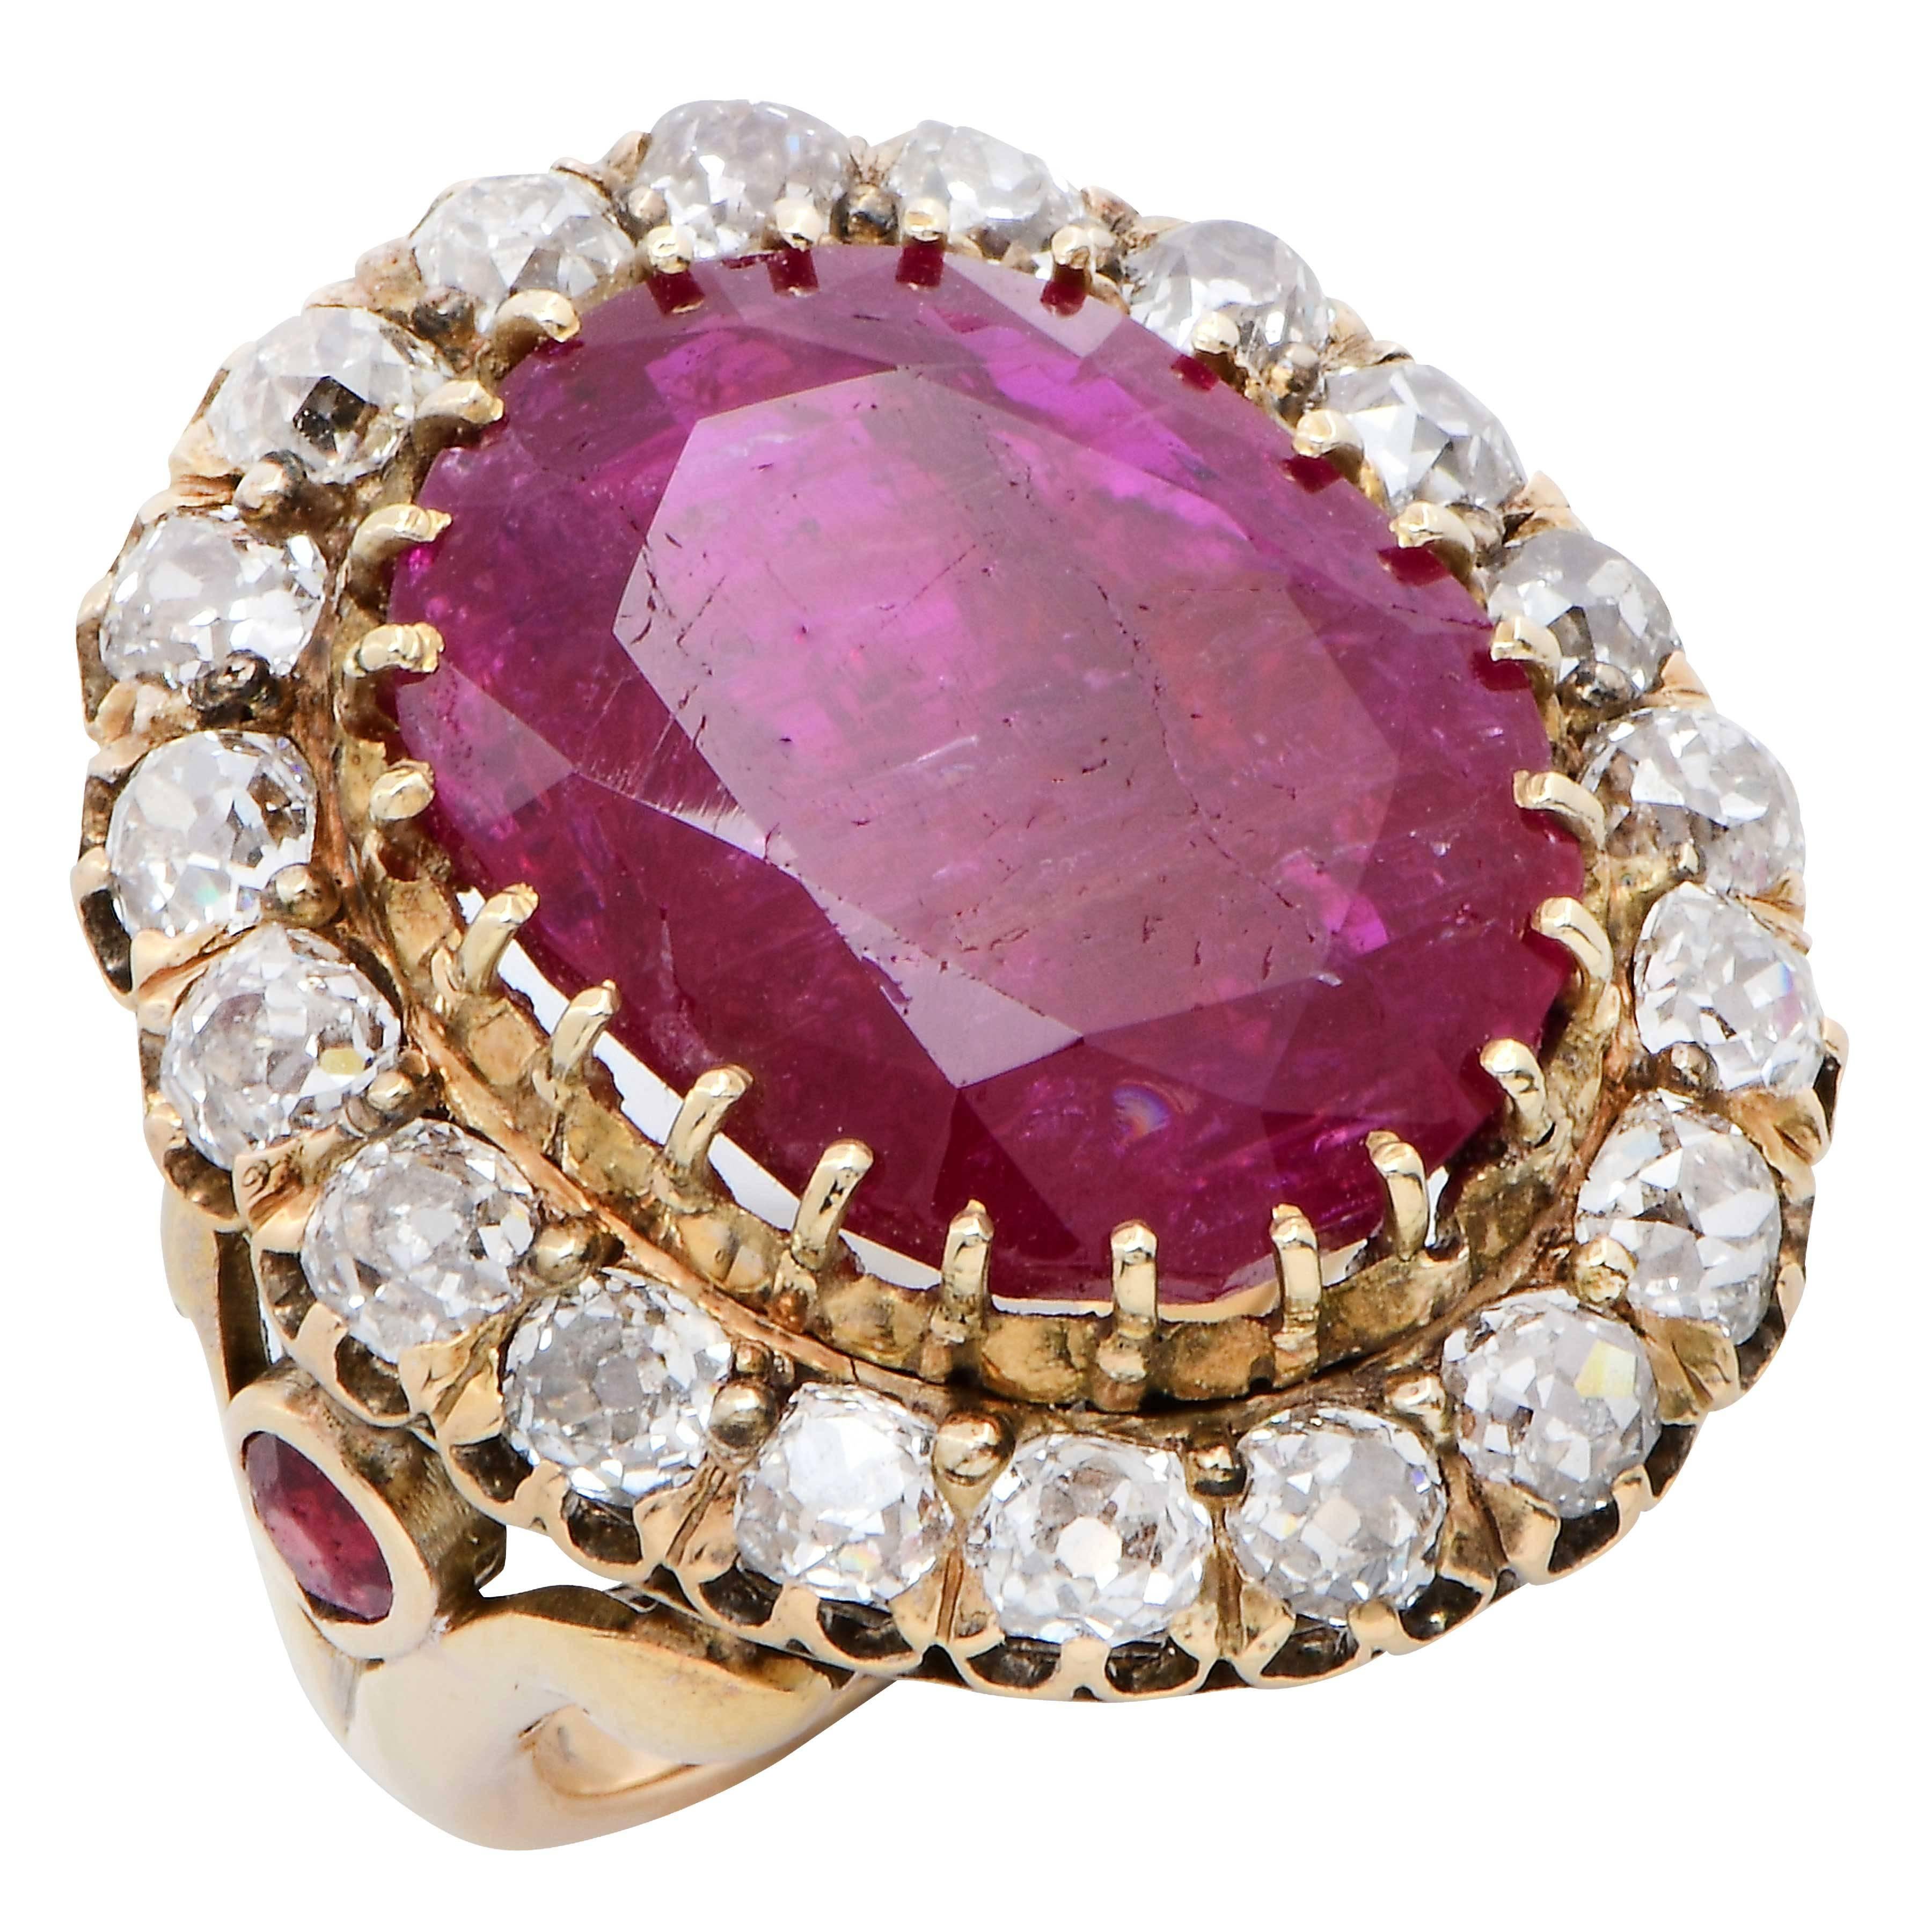 Ruby ring set with an oval ruby weighing approximately 12 carats, and 2 pear shape rubies weighing approximately 0.50 carats. The oval ruby is surrounding with approximately 3 carats of old mine cut diamonds. Size 4 1/2. Can be sized.